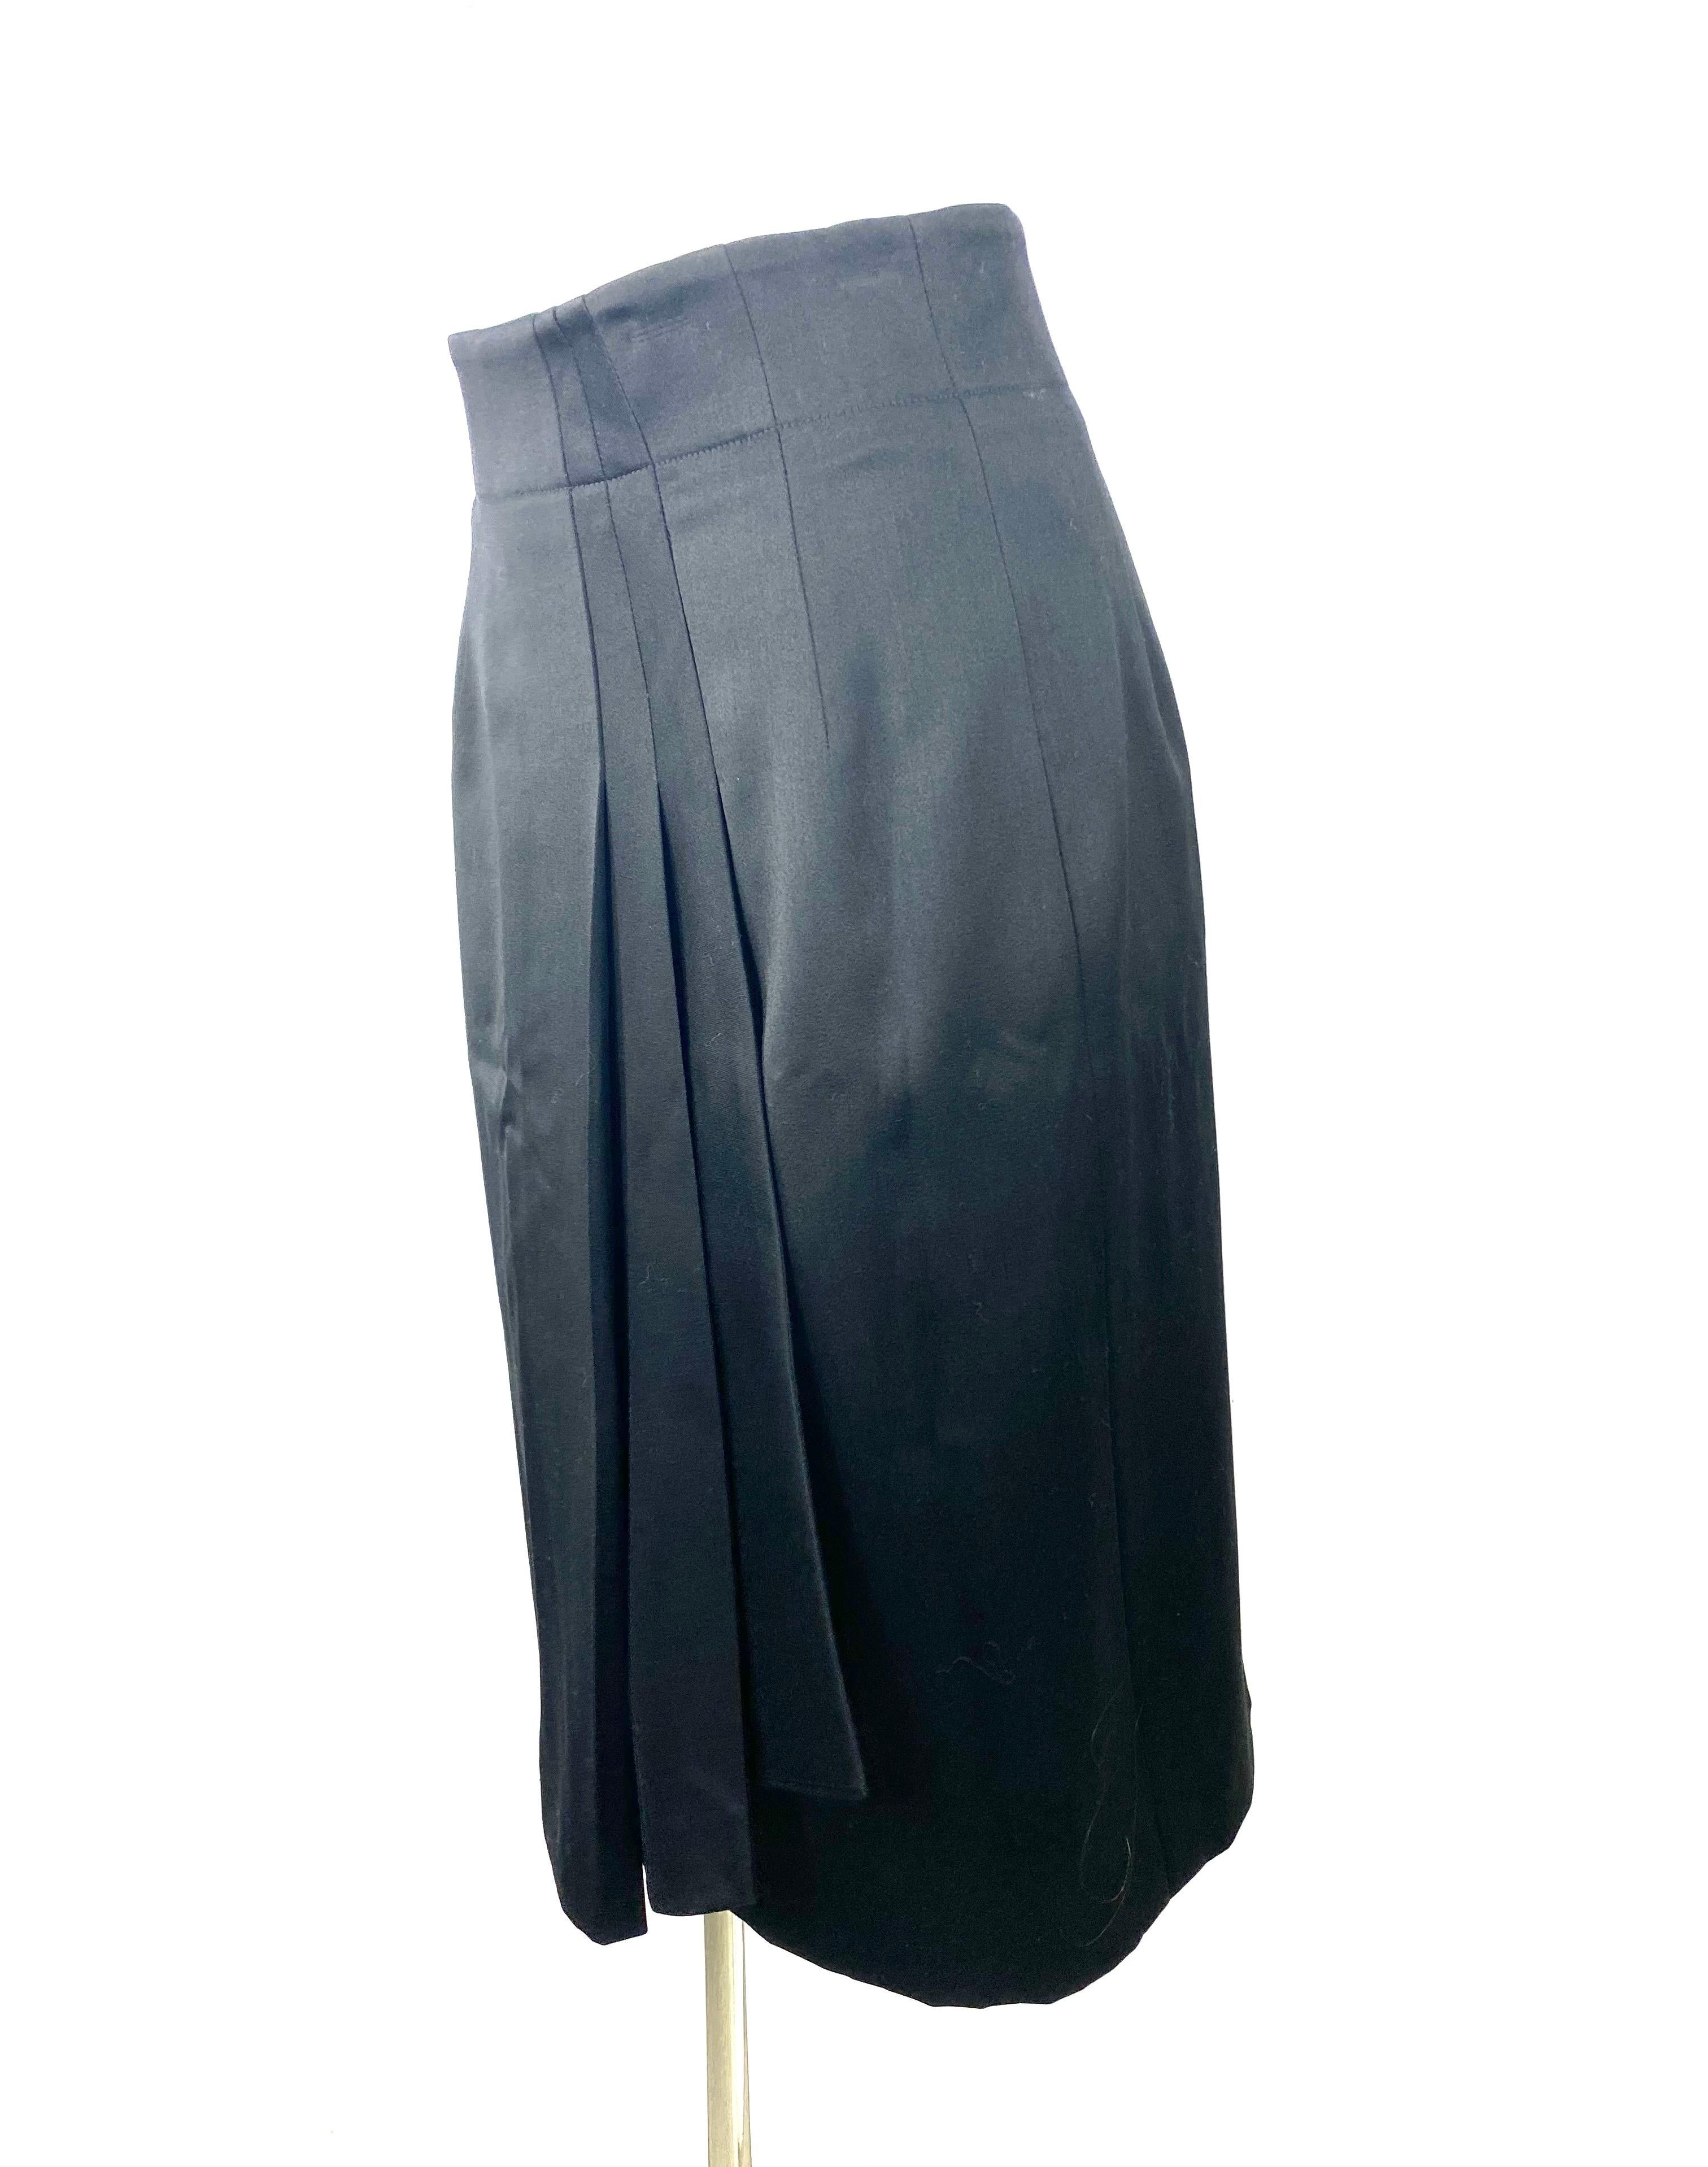 Product details:

The skirt features pleated front design with front slit, rear zip closure and mid length.